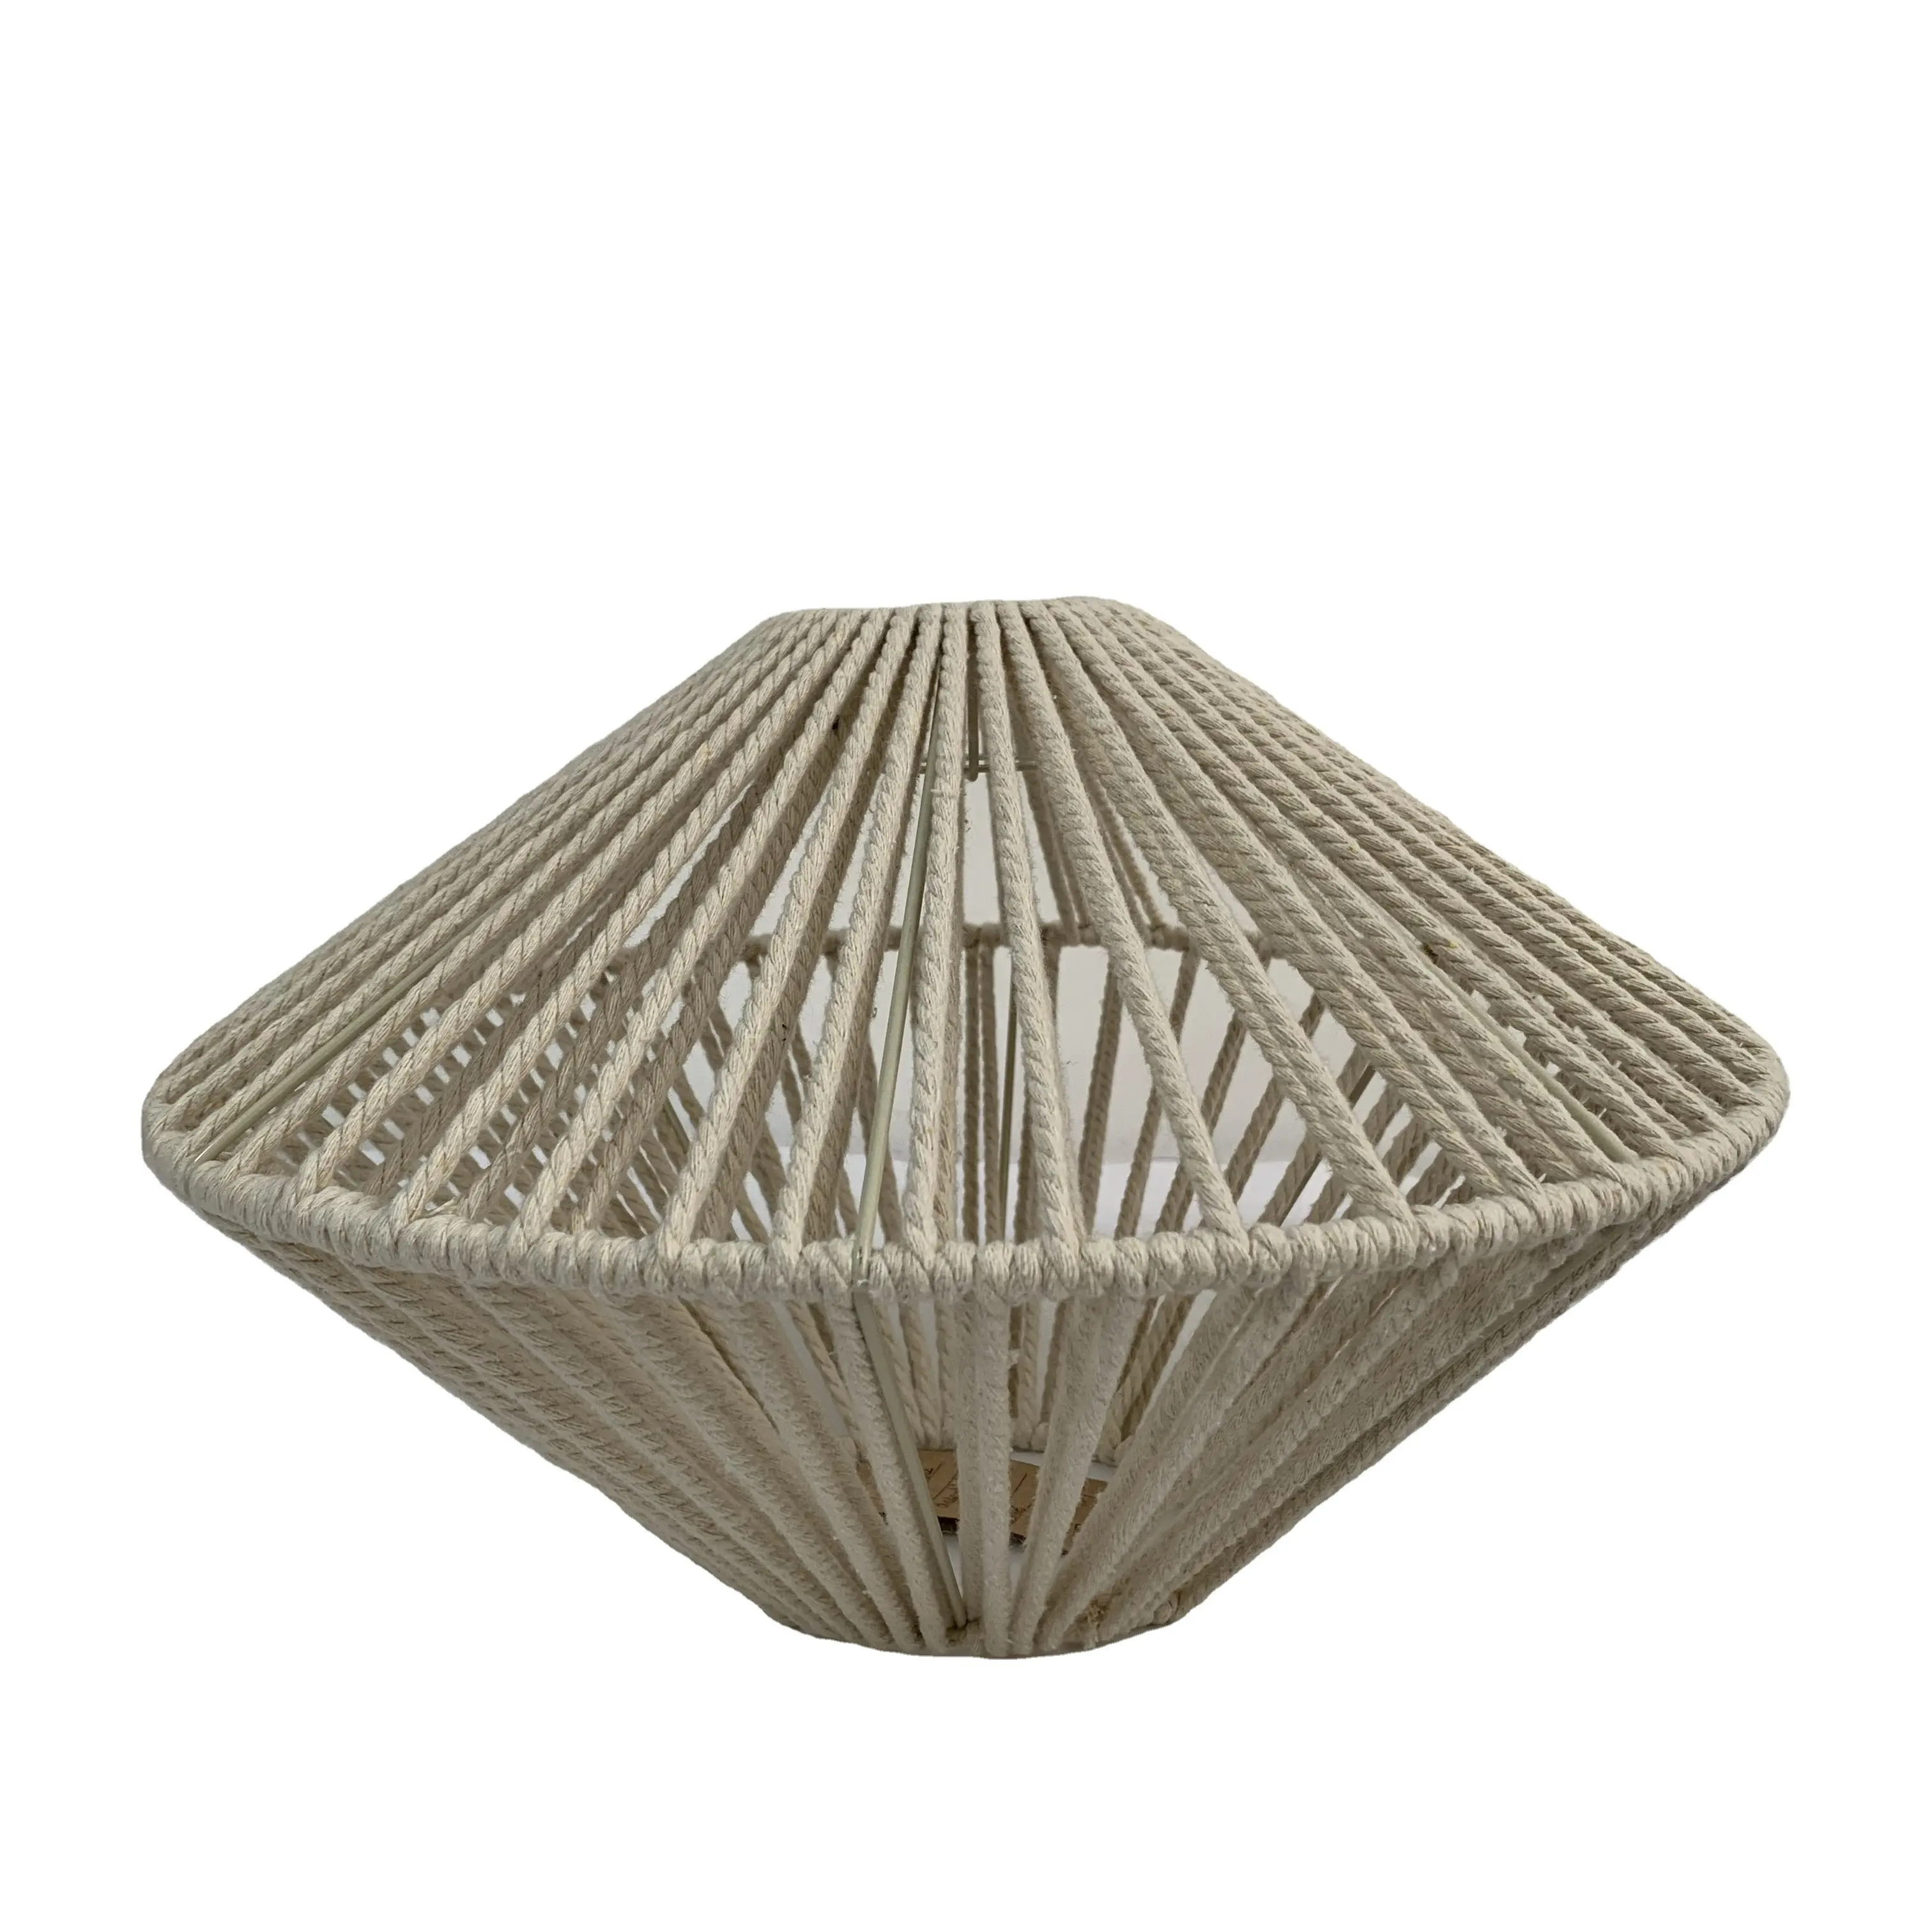 XH Woven cotton rope rhombus shape Pendant lamp light, woven lampshade for Living Room Bedroom Restaurant Cafe Teahouse Bar Club